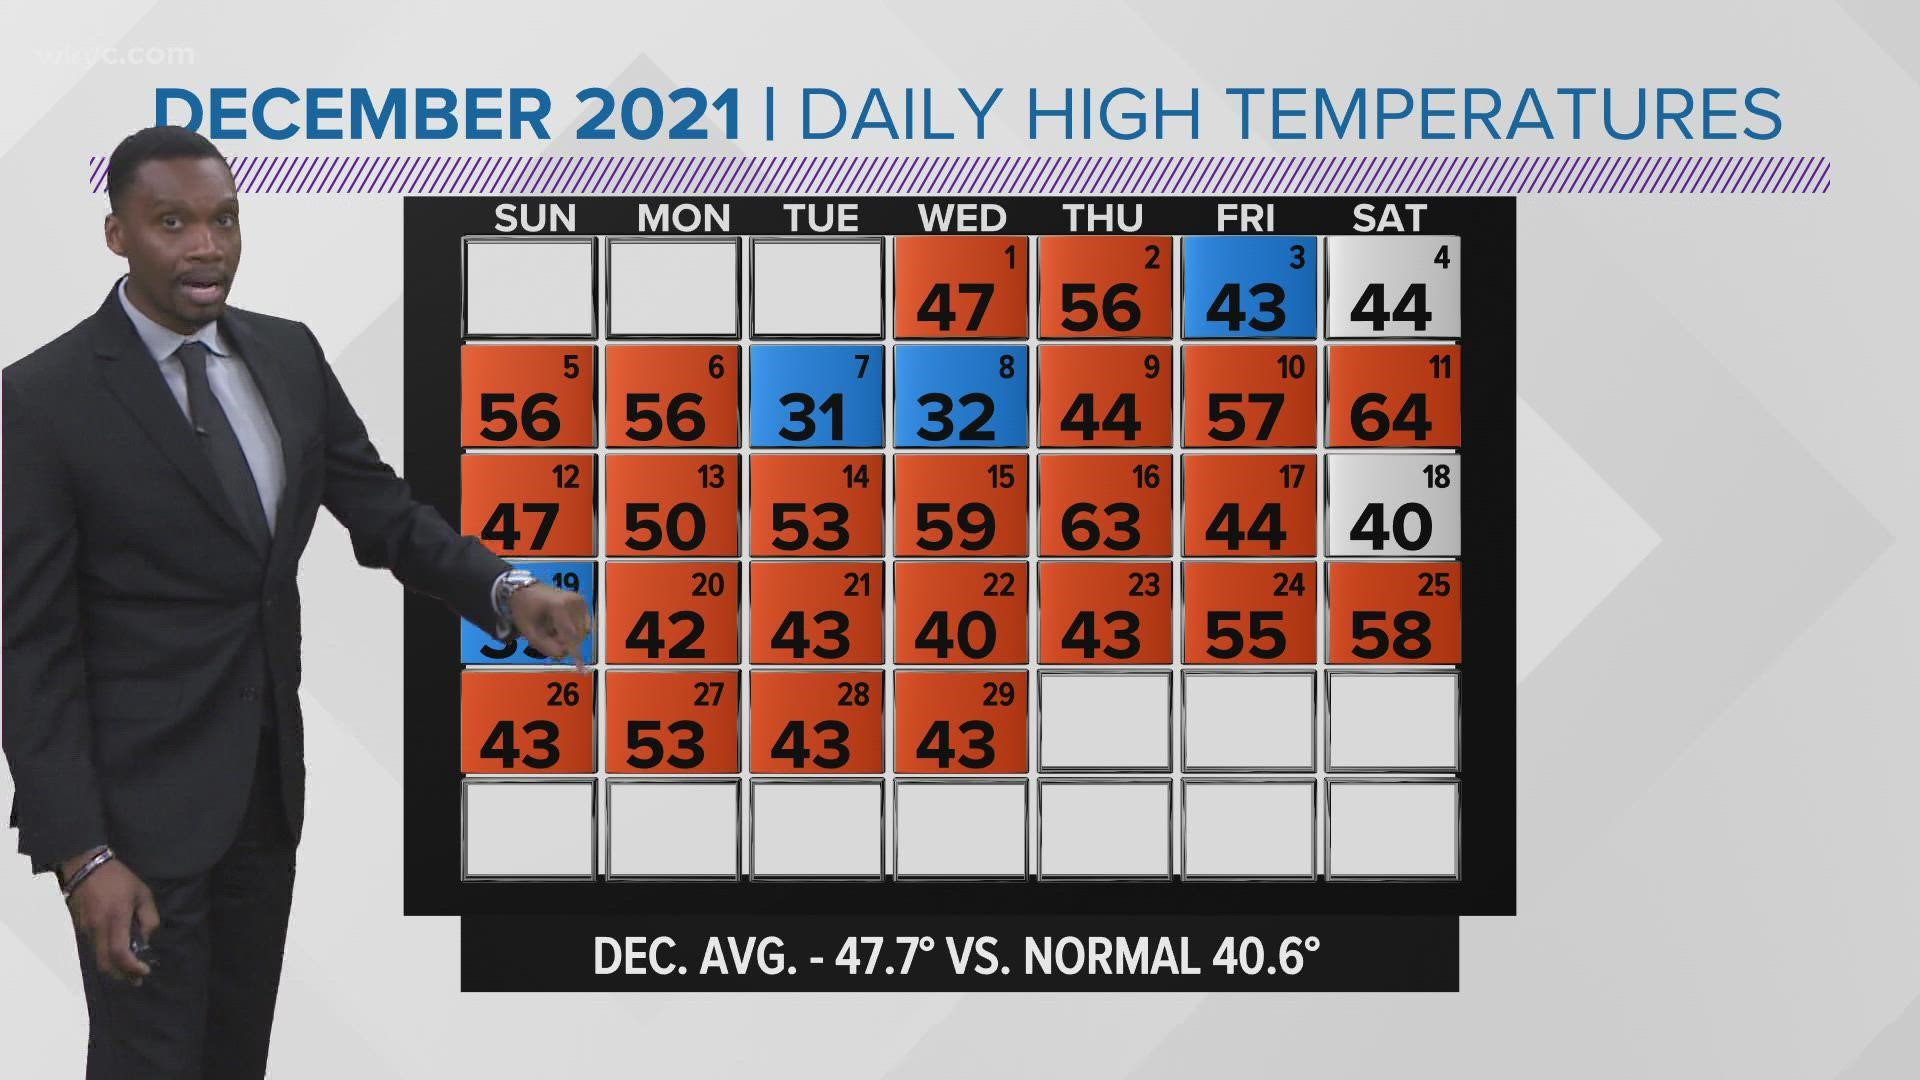 Mild temperatures and a wet pattern to end the year and begin 2022.